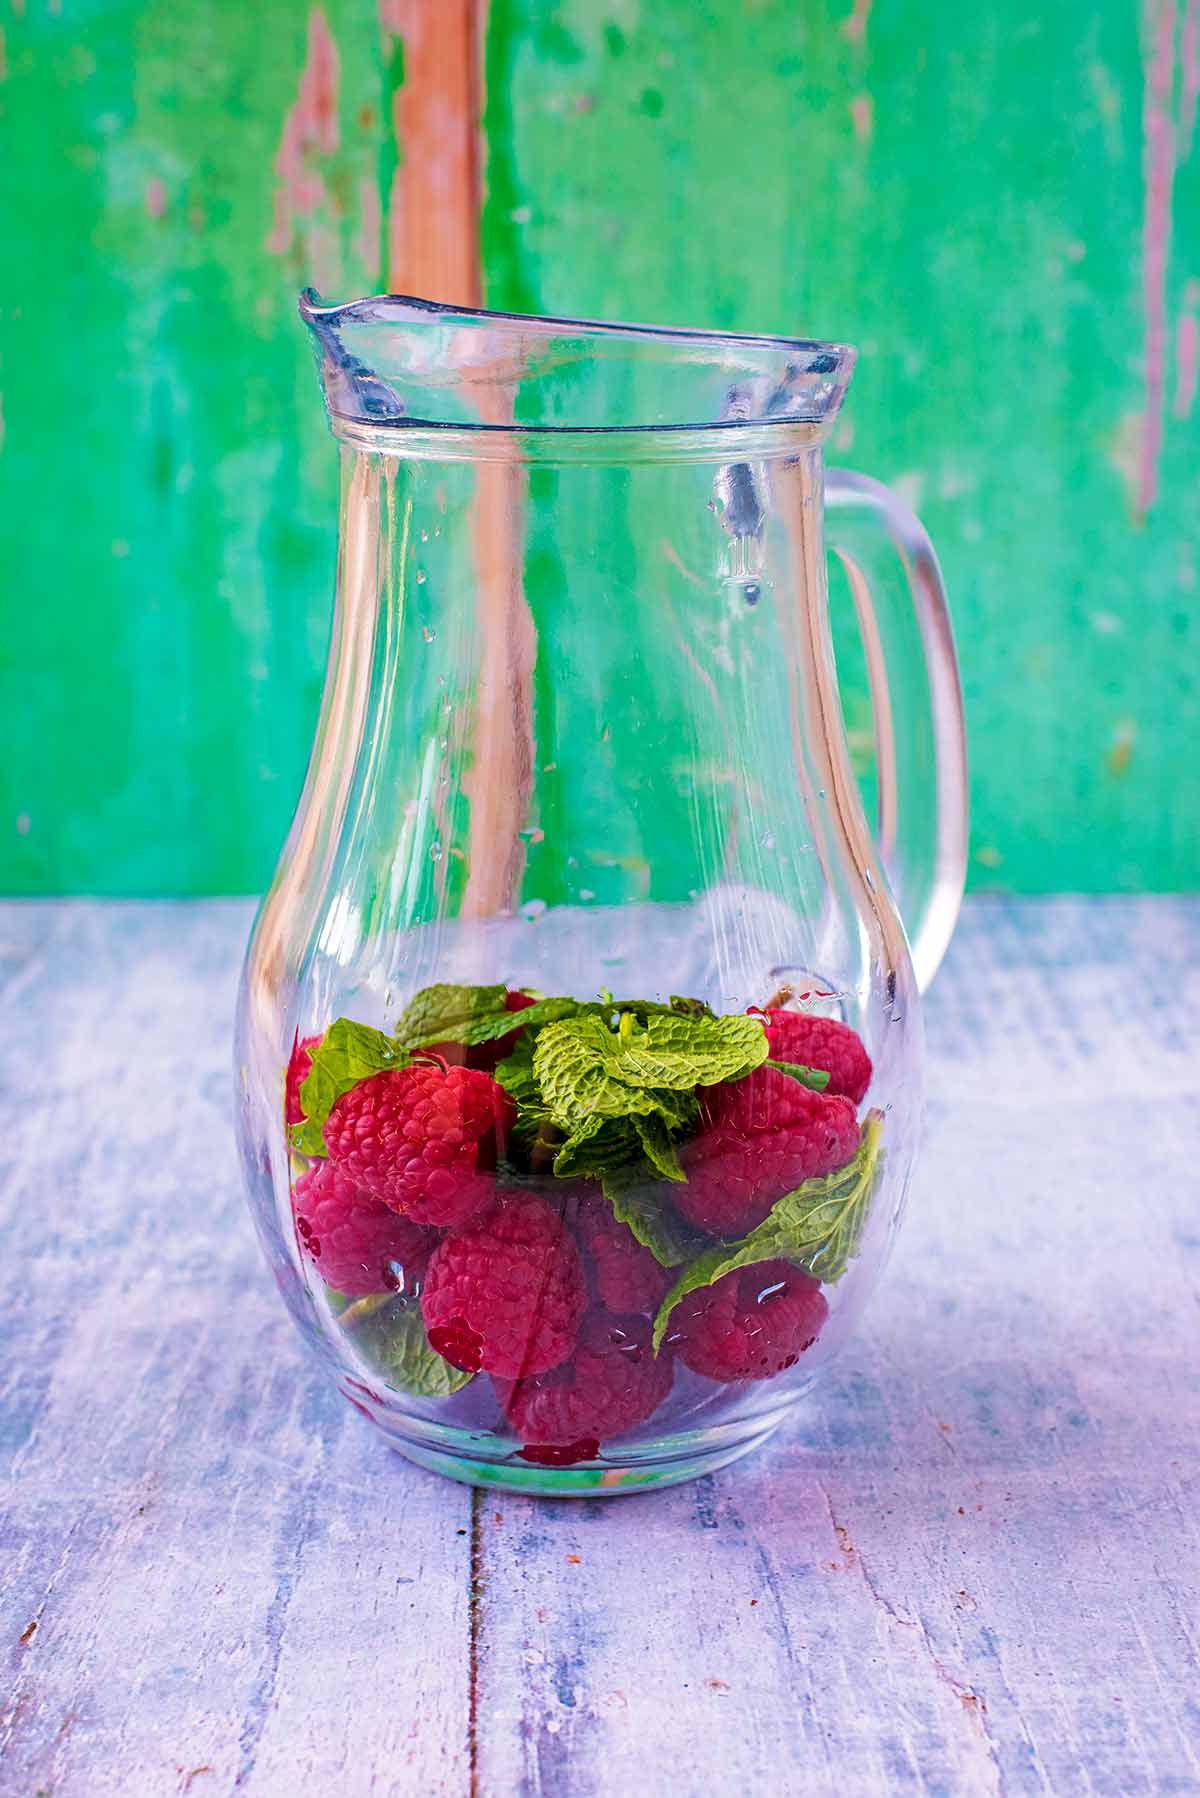 A large glass jug with raspberries and mint leaves in it.